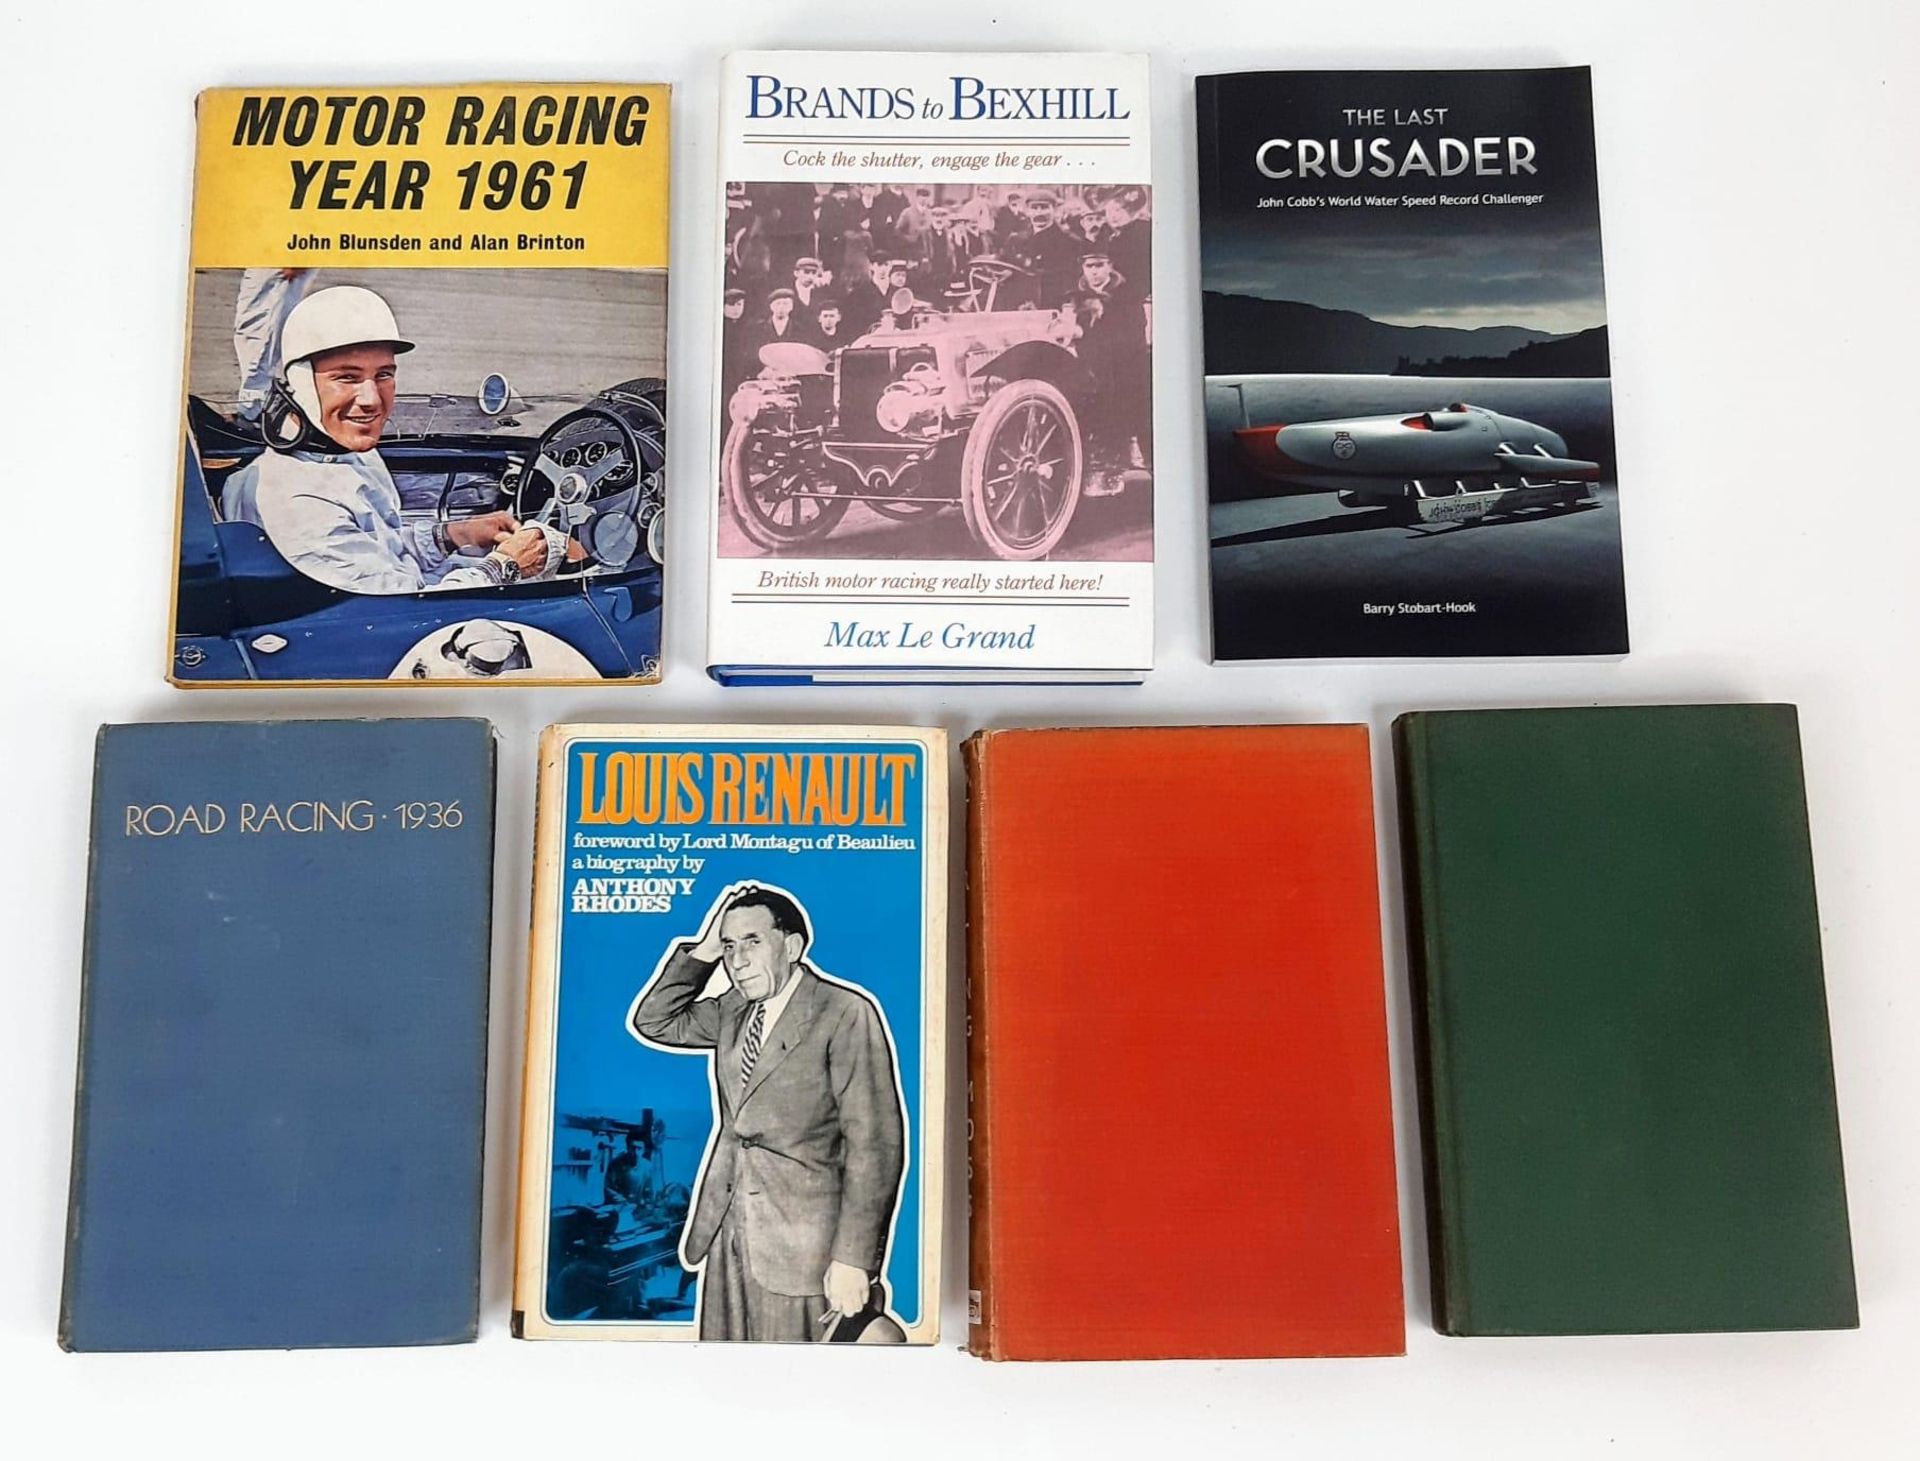 A collection of motorsport biographies and memoirs including a first edition of Road racing-1936